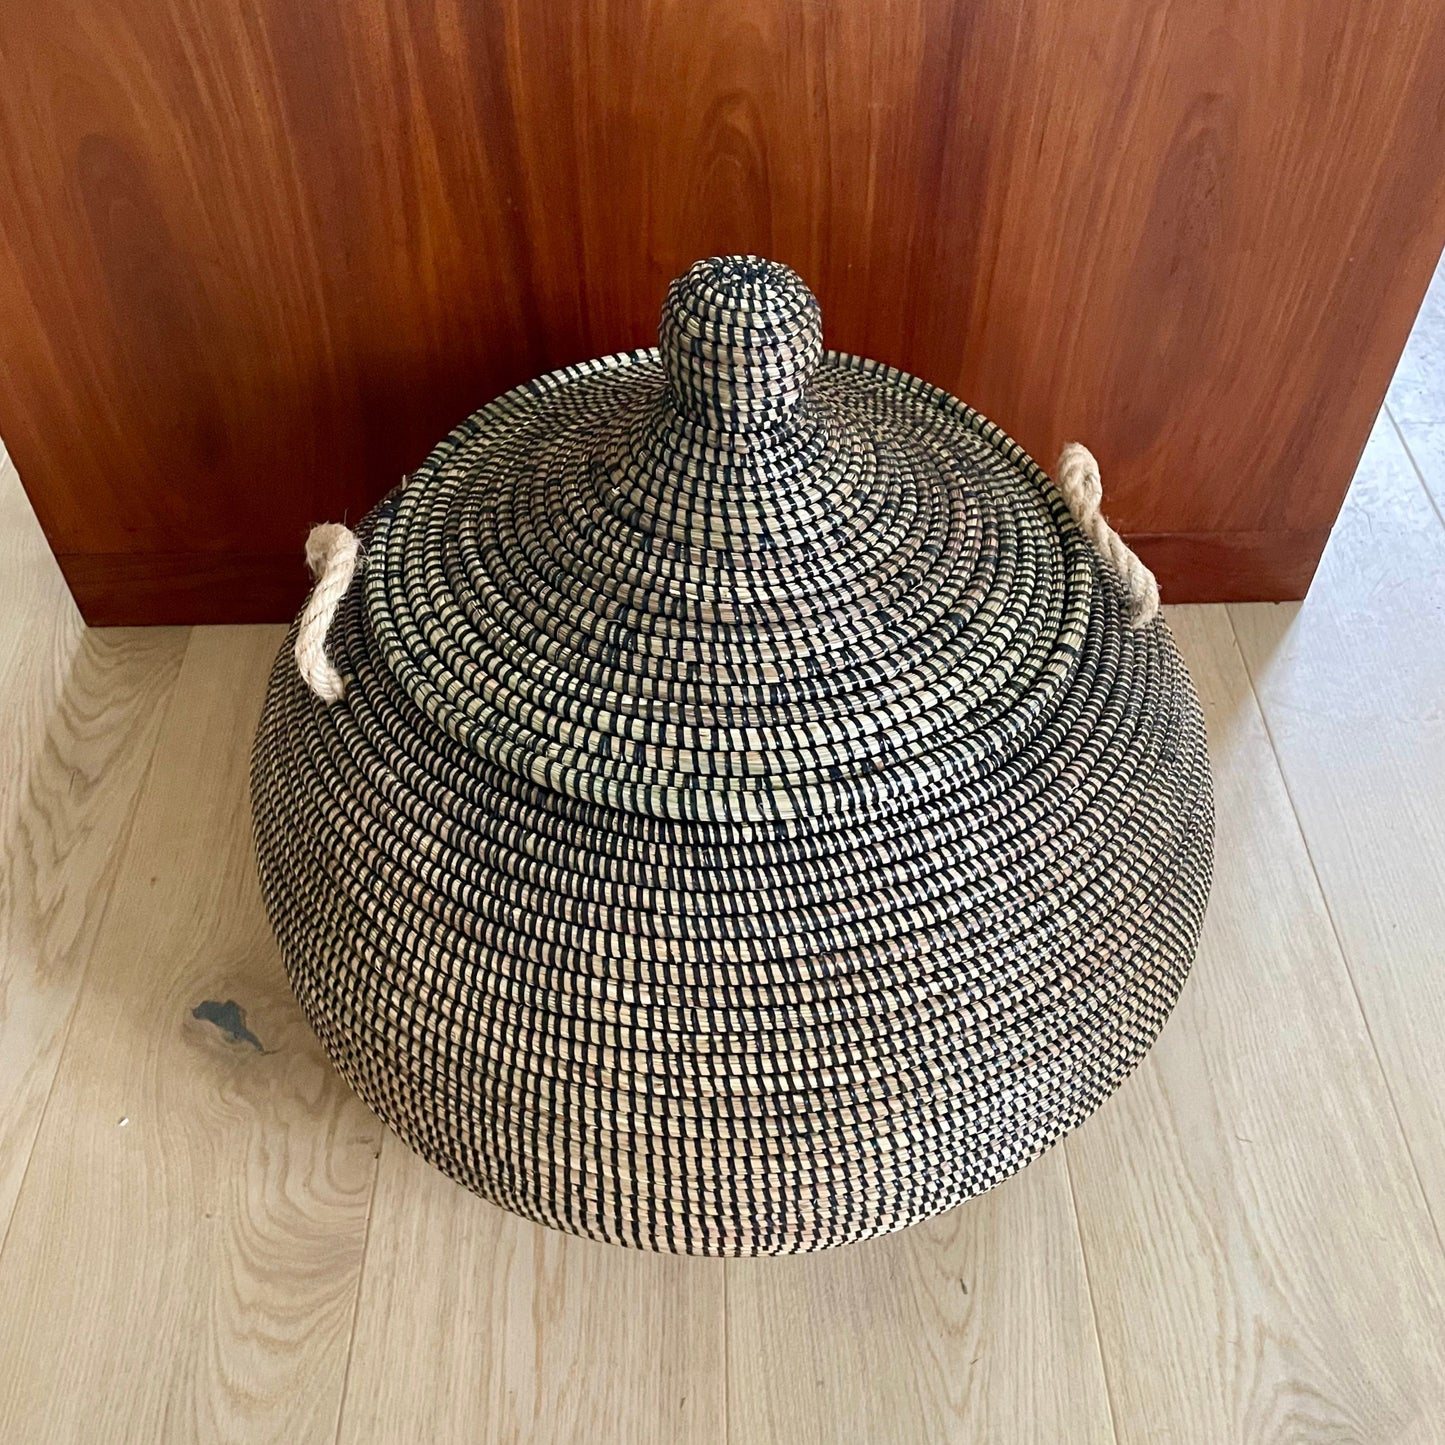 Ball baskets (Ndaa). Handwoven basket with lid in elephant grass with recycled plastic thread. Fair Trade from Senegal